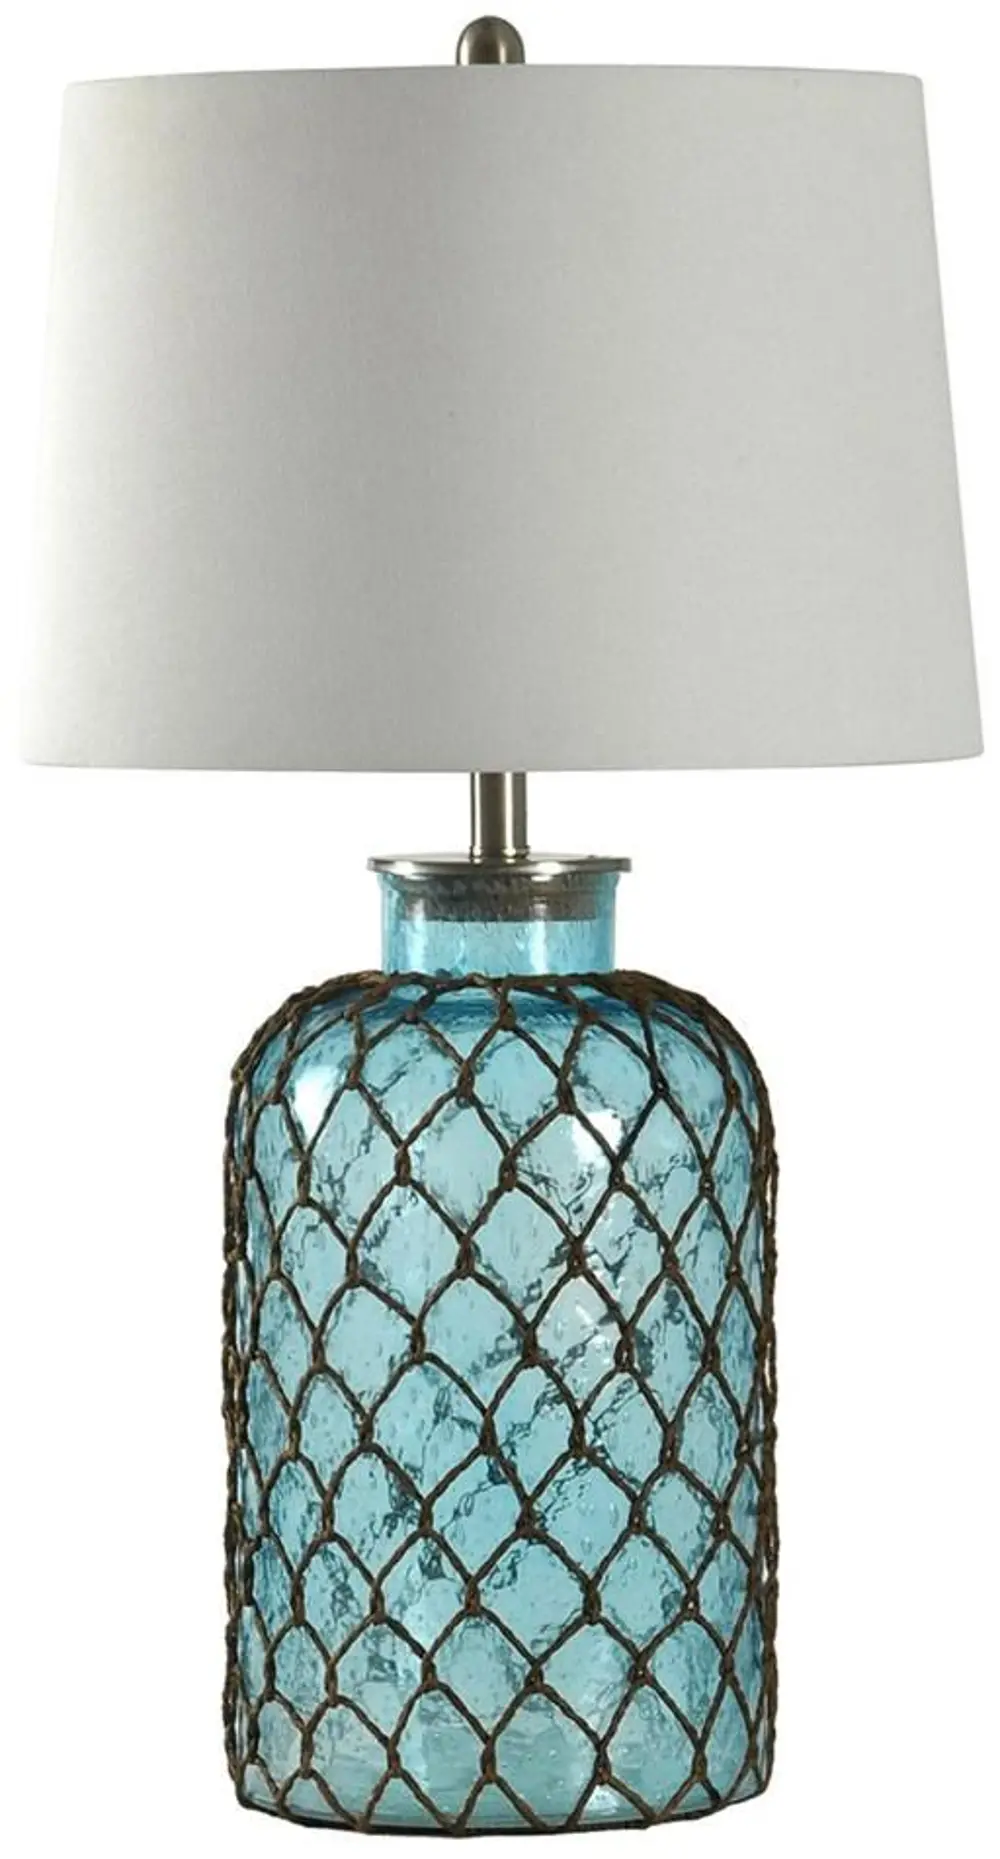 Blue Seeded Glass Table Lamp with Netting-1